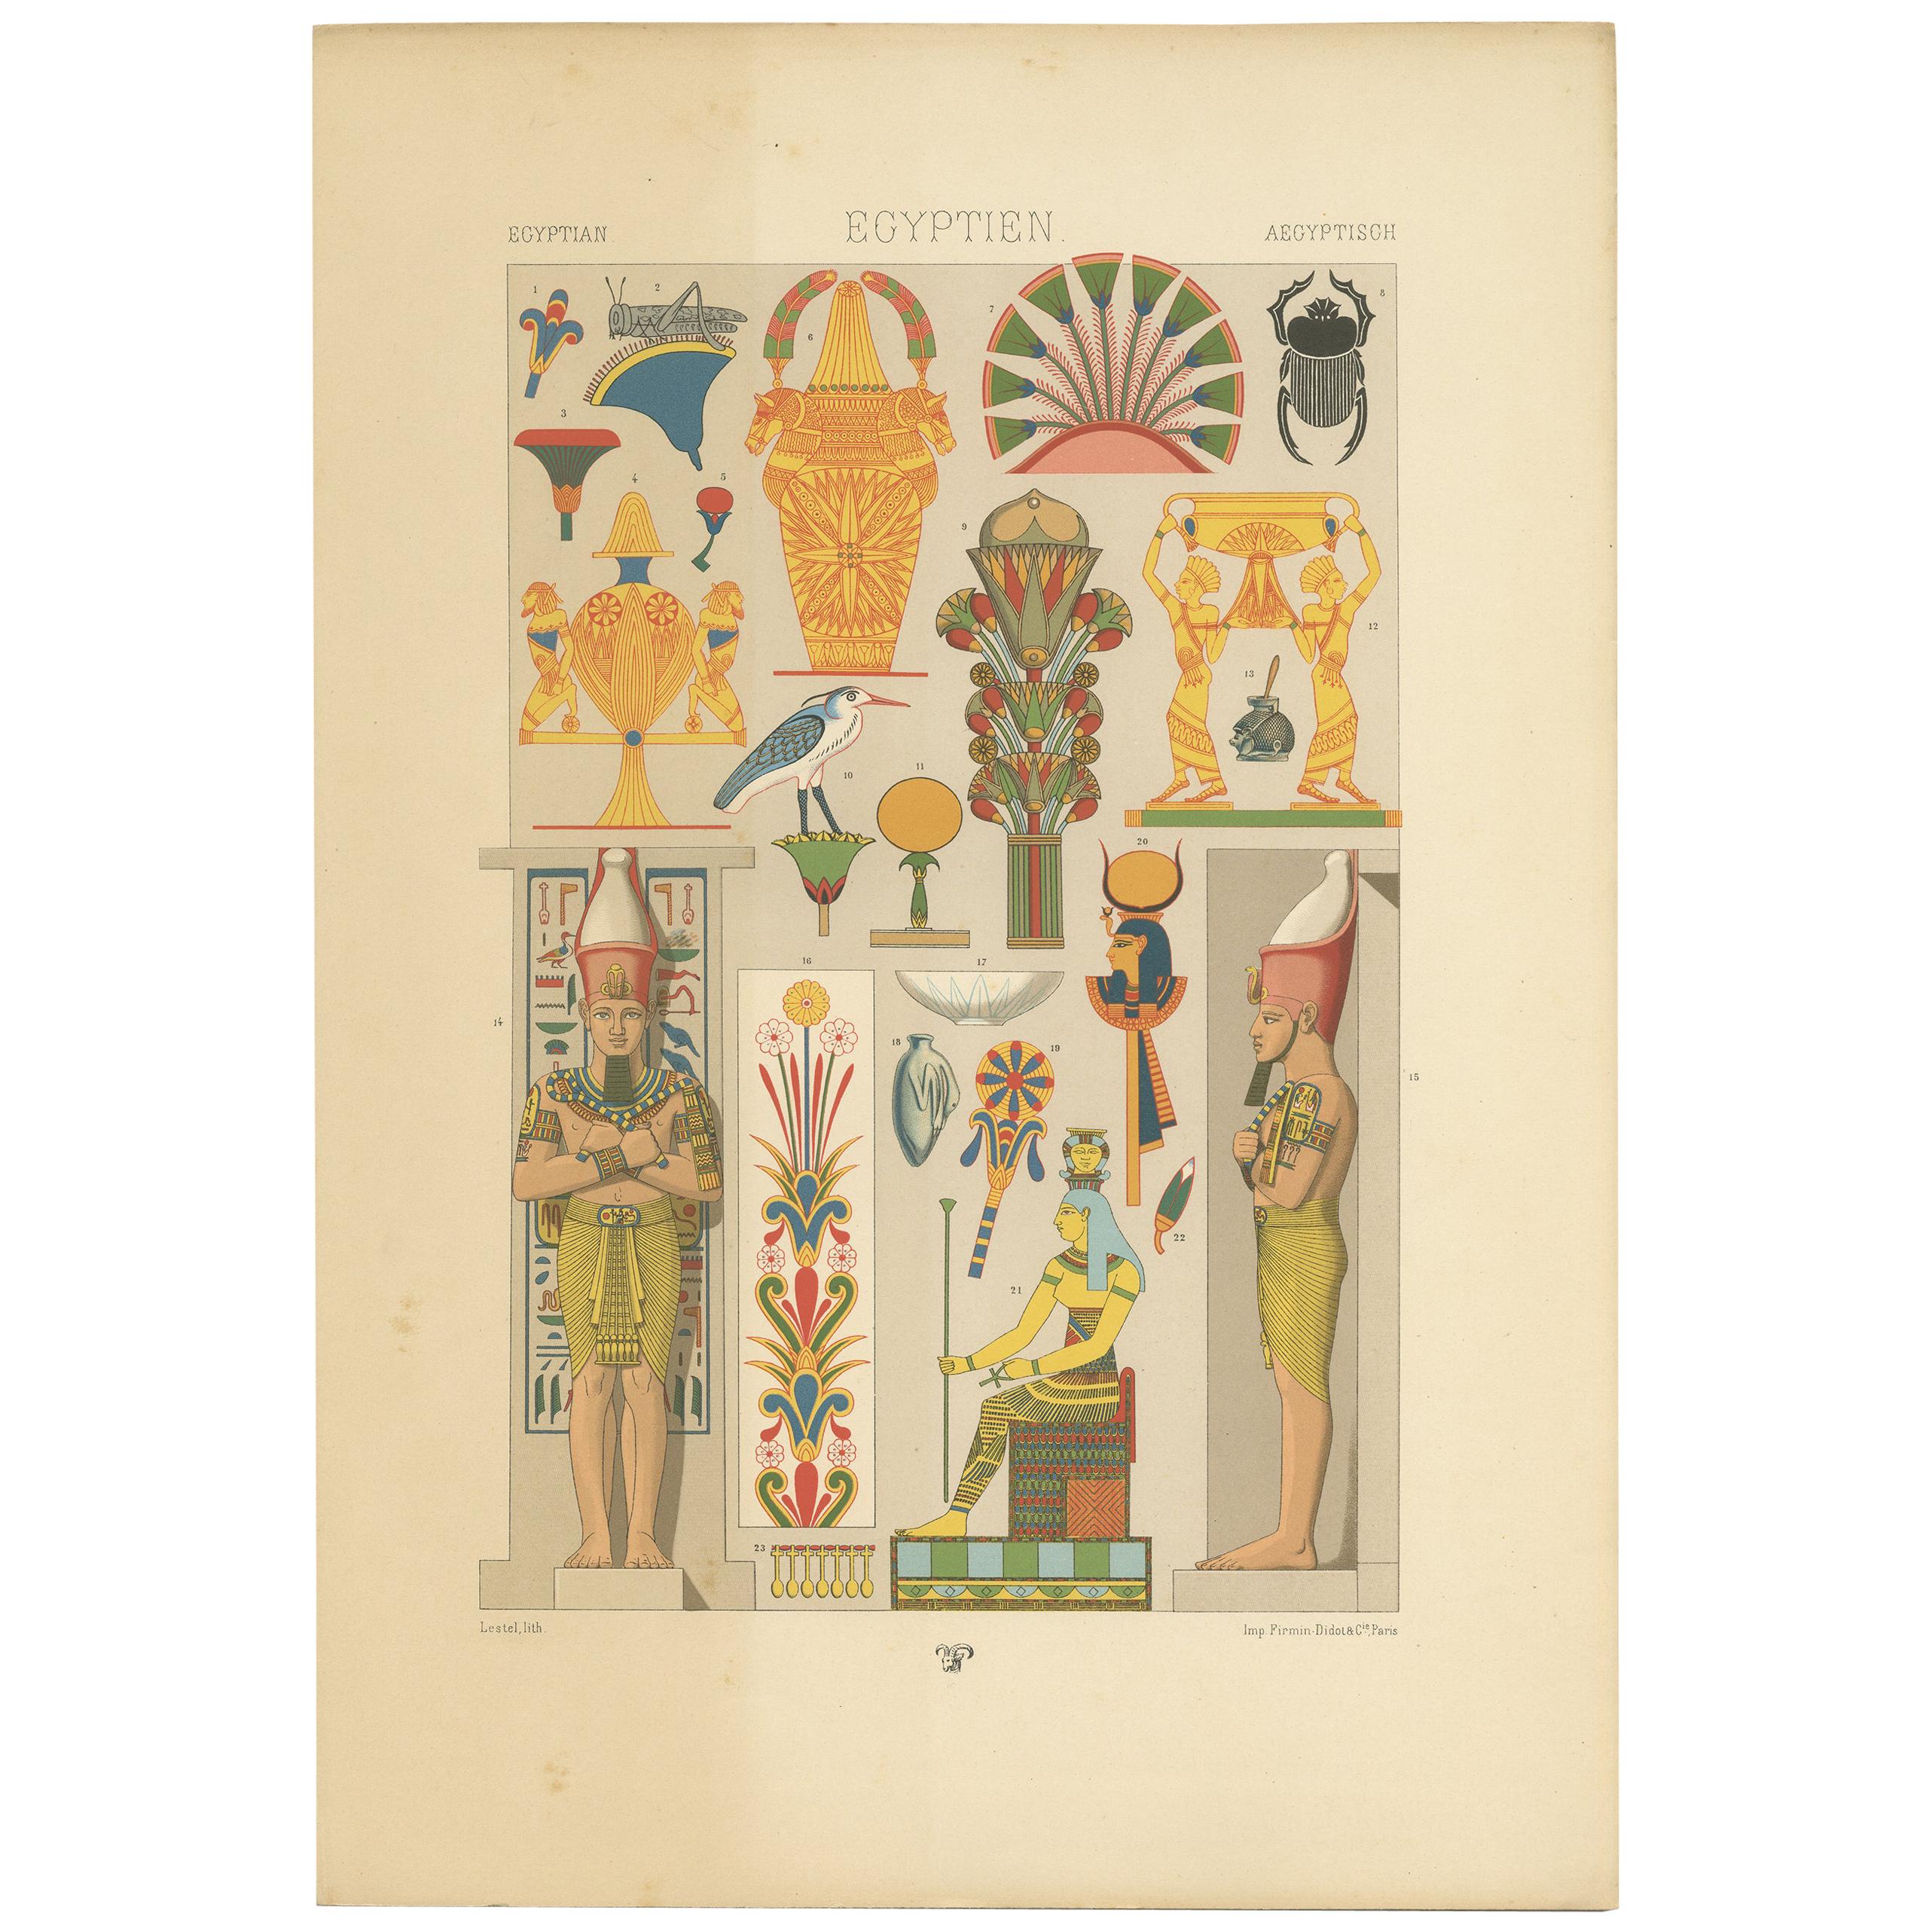 Pl. 1 Antique Print of Egyptian Motifs from Murals and Reliefs by Racinet For Sale